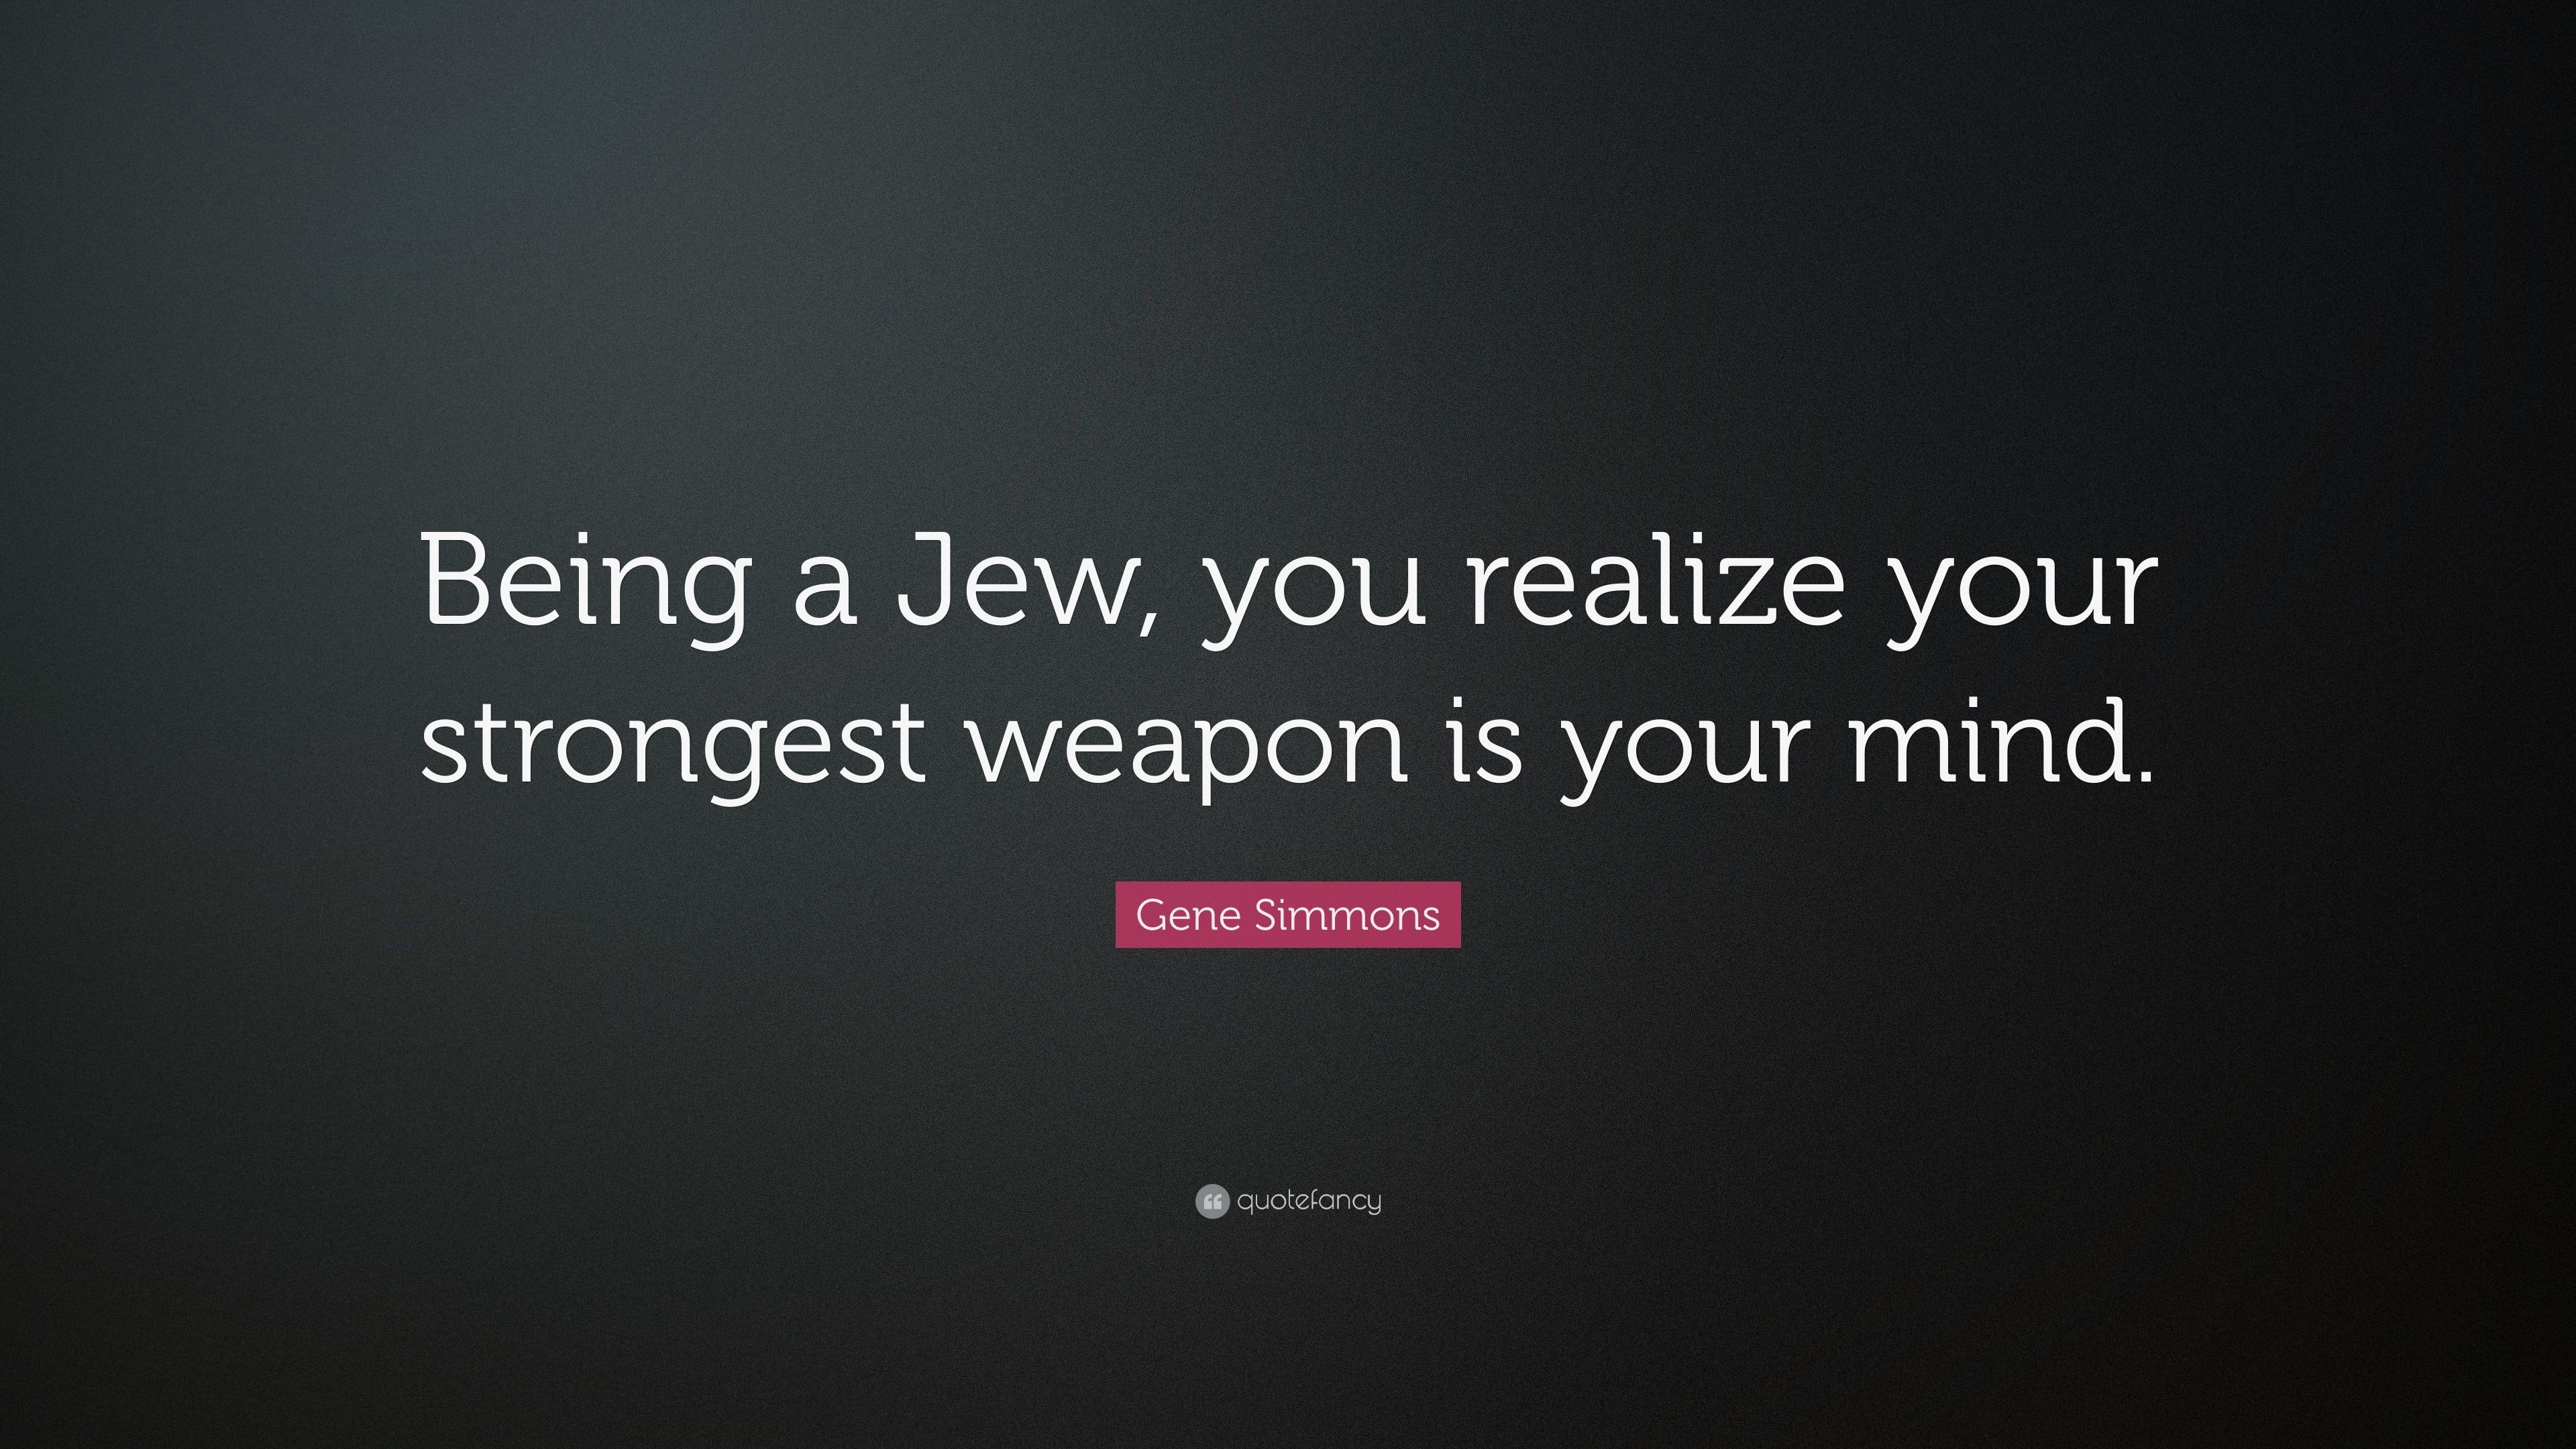 3840x2160 Gene Simmons Quote: “Being a Jew, you realize your strongest weapon is your